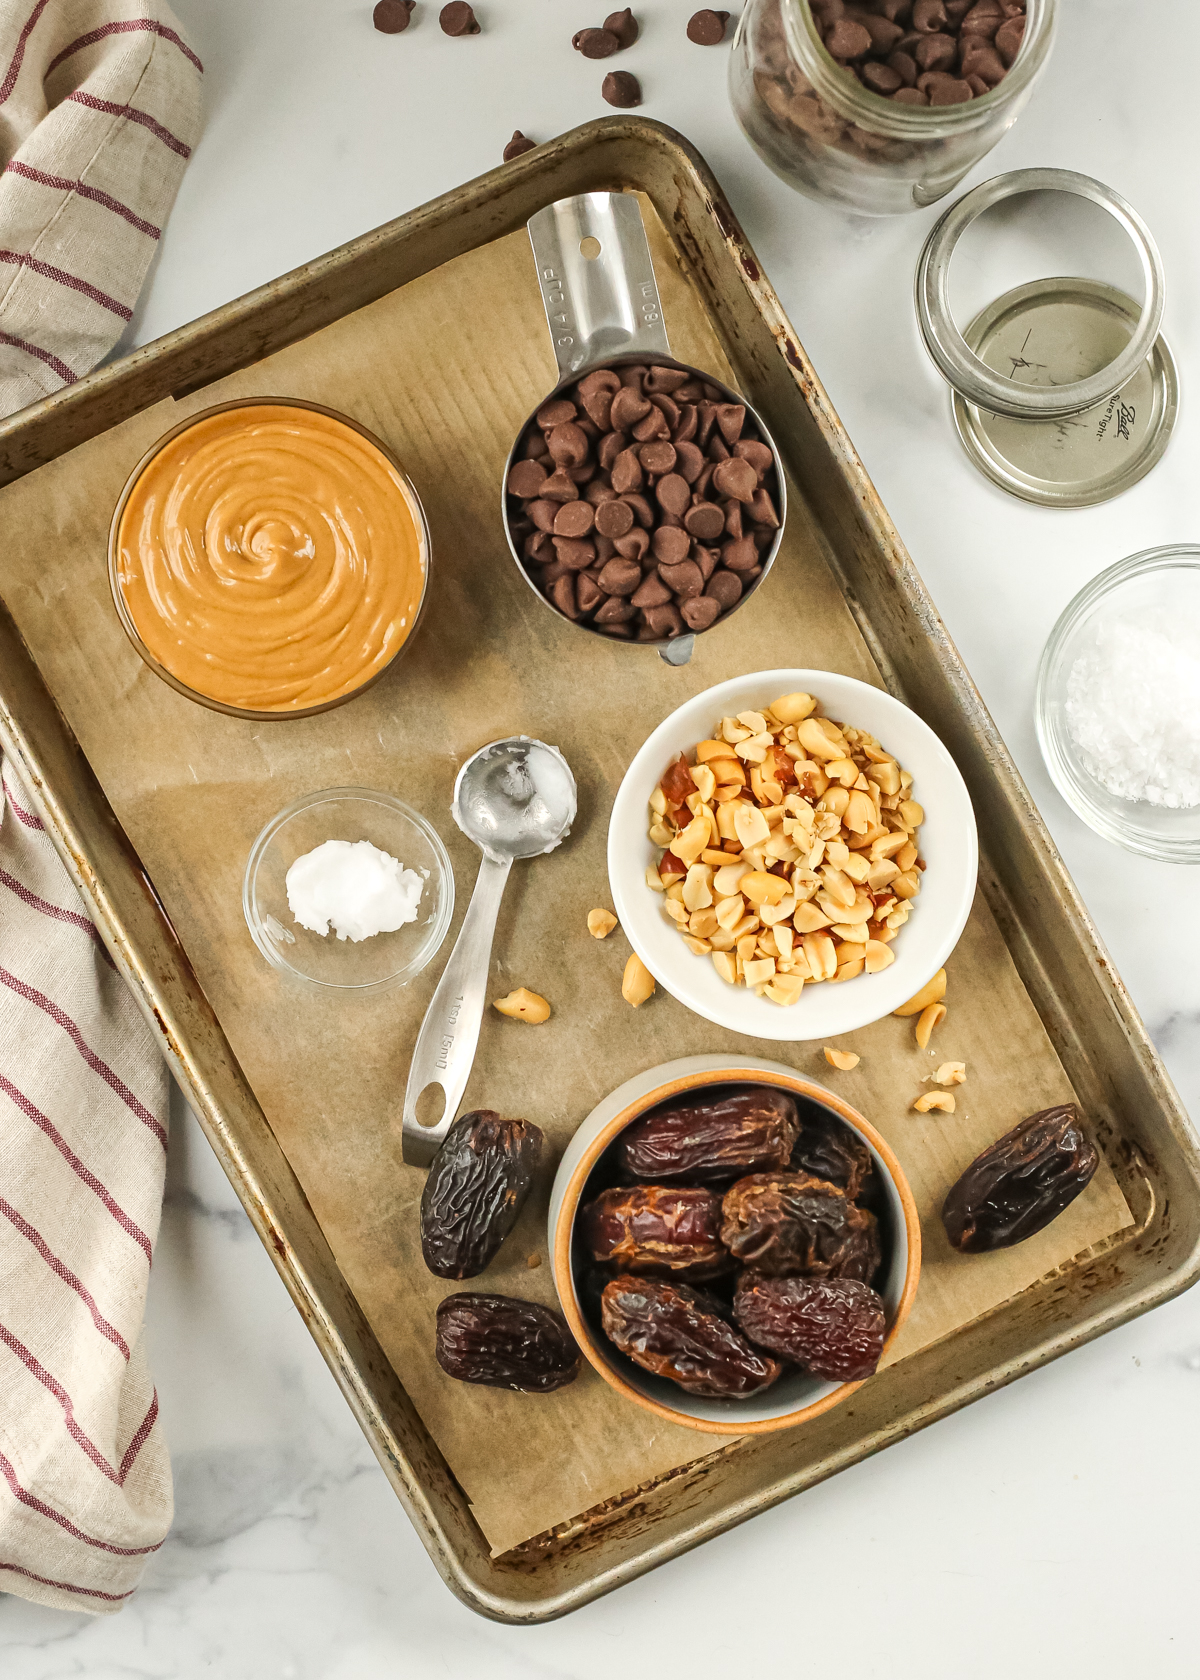 A baking tray is lined with a piece of parchment paper with the ingredients needed for date bark on top, including peanut butter, chocolate chips, roasted peanuts, coconut oil, and medjool dates